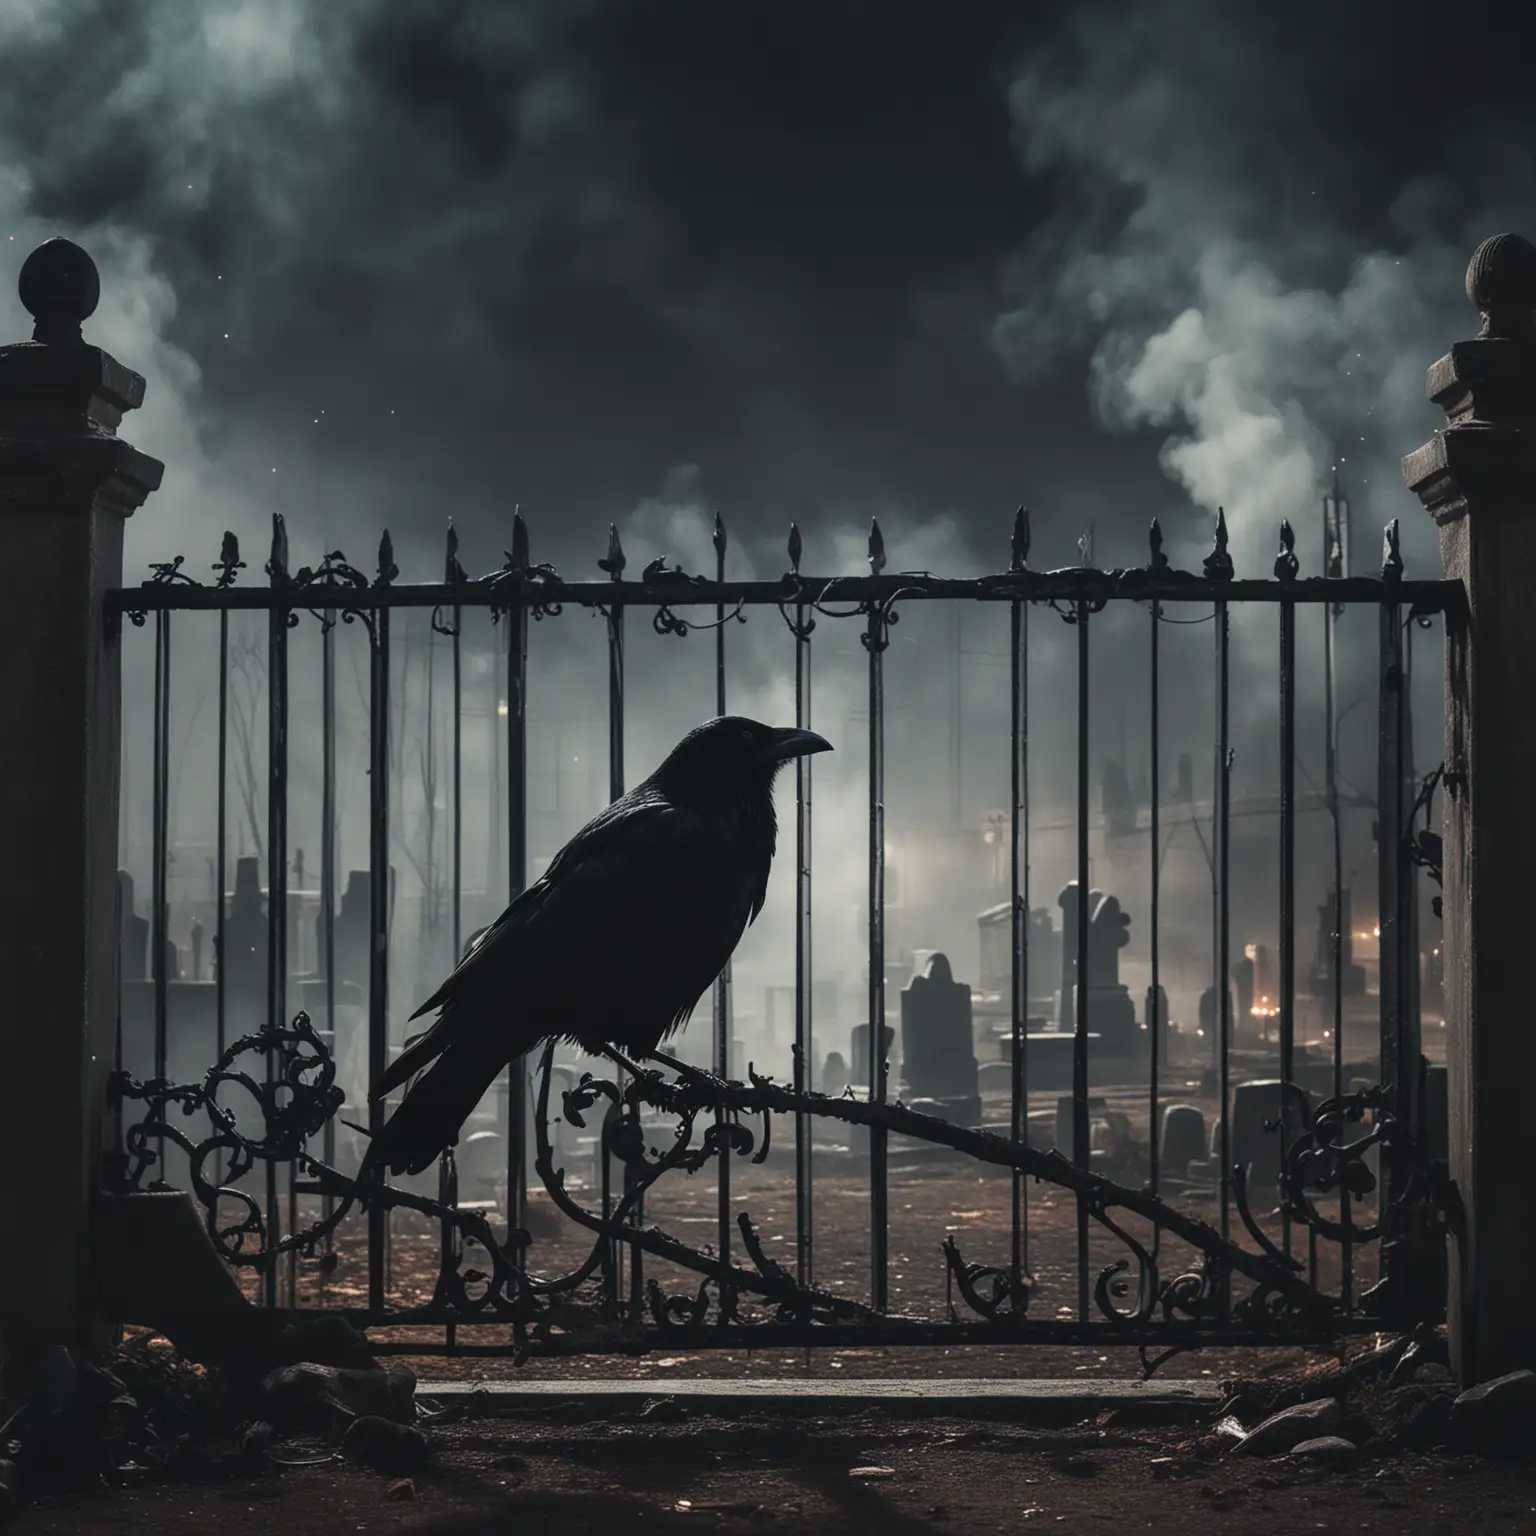 a black crow sitting on a metal gate in front of a graveyard at night with smoke